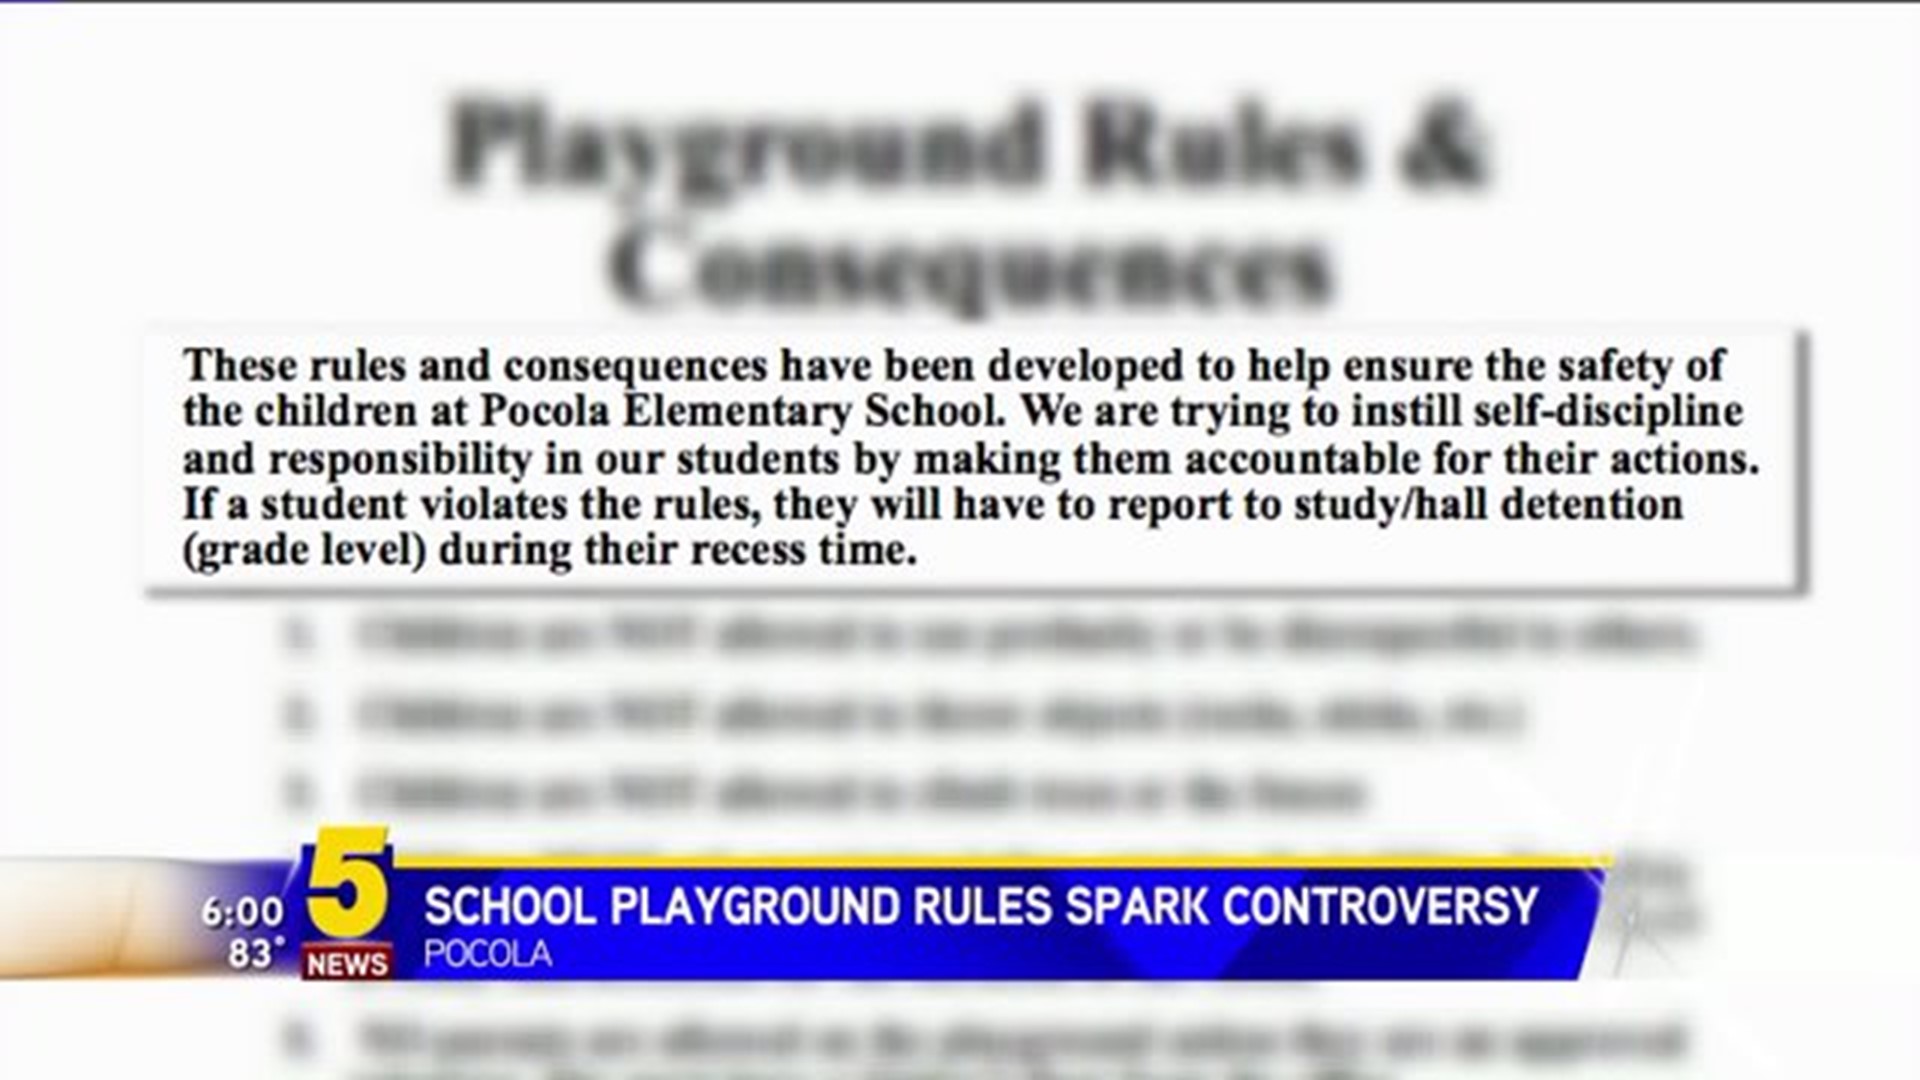 Parents Say Playground Rules At Pocola Elementary School "Too Strict"